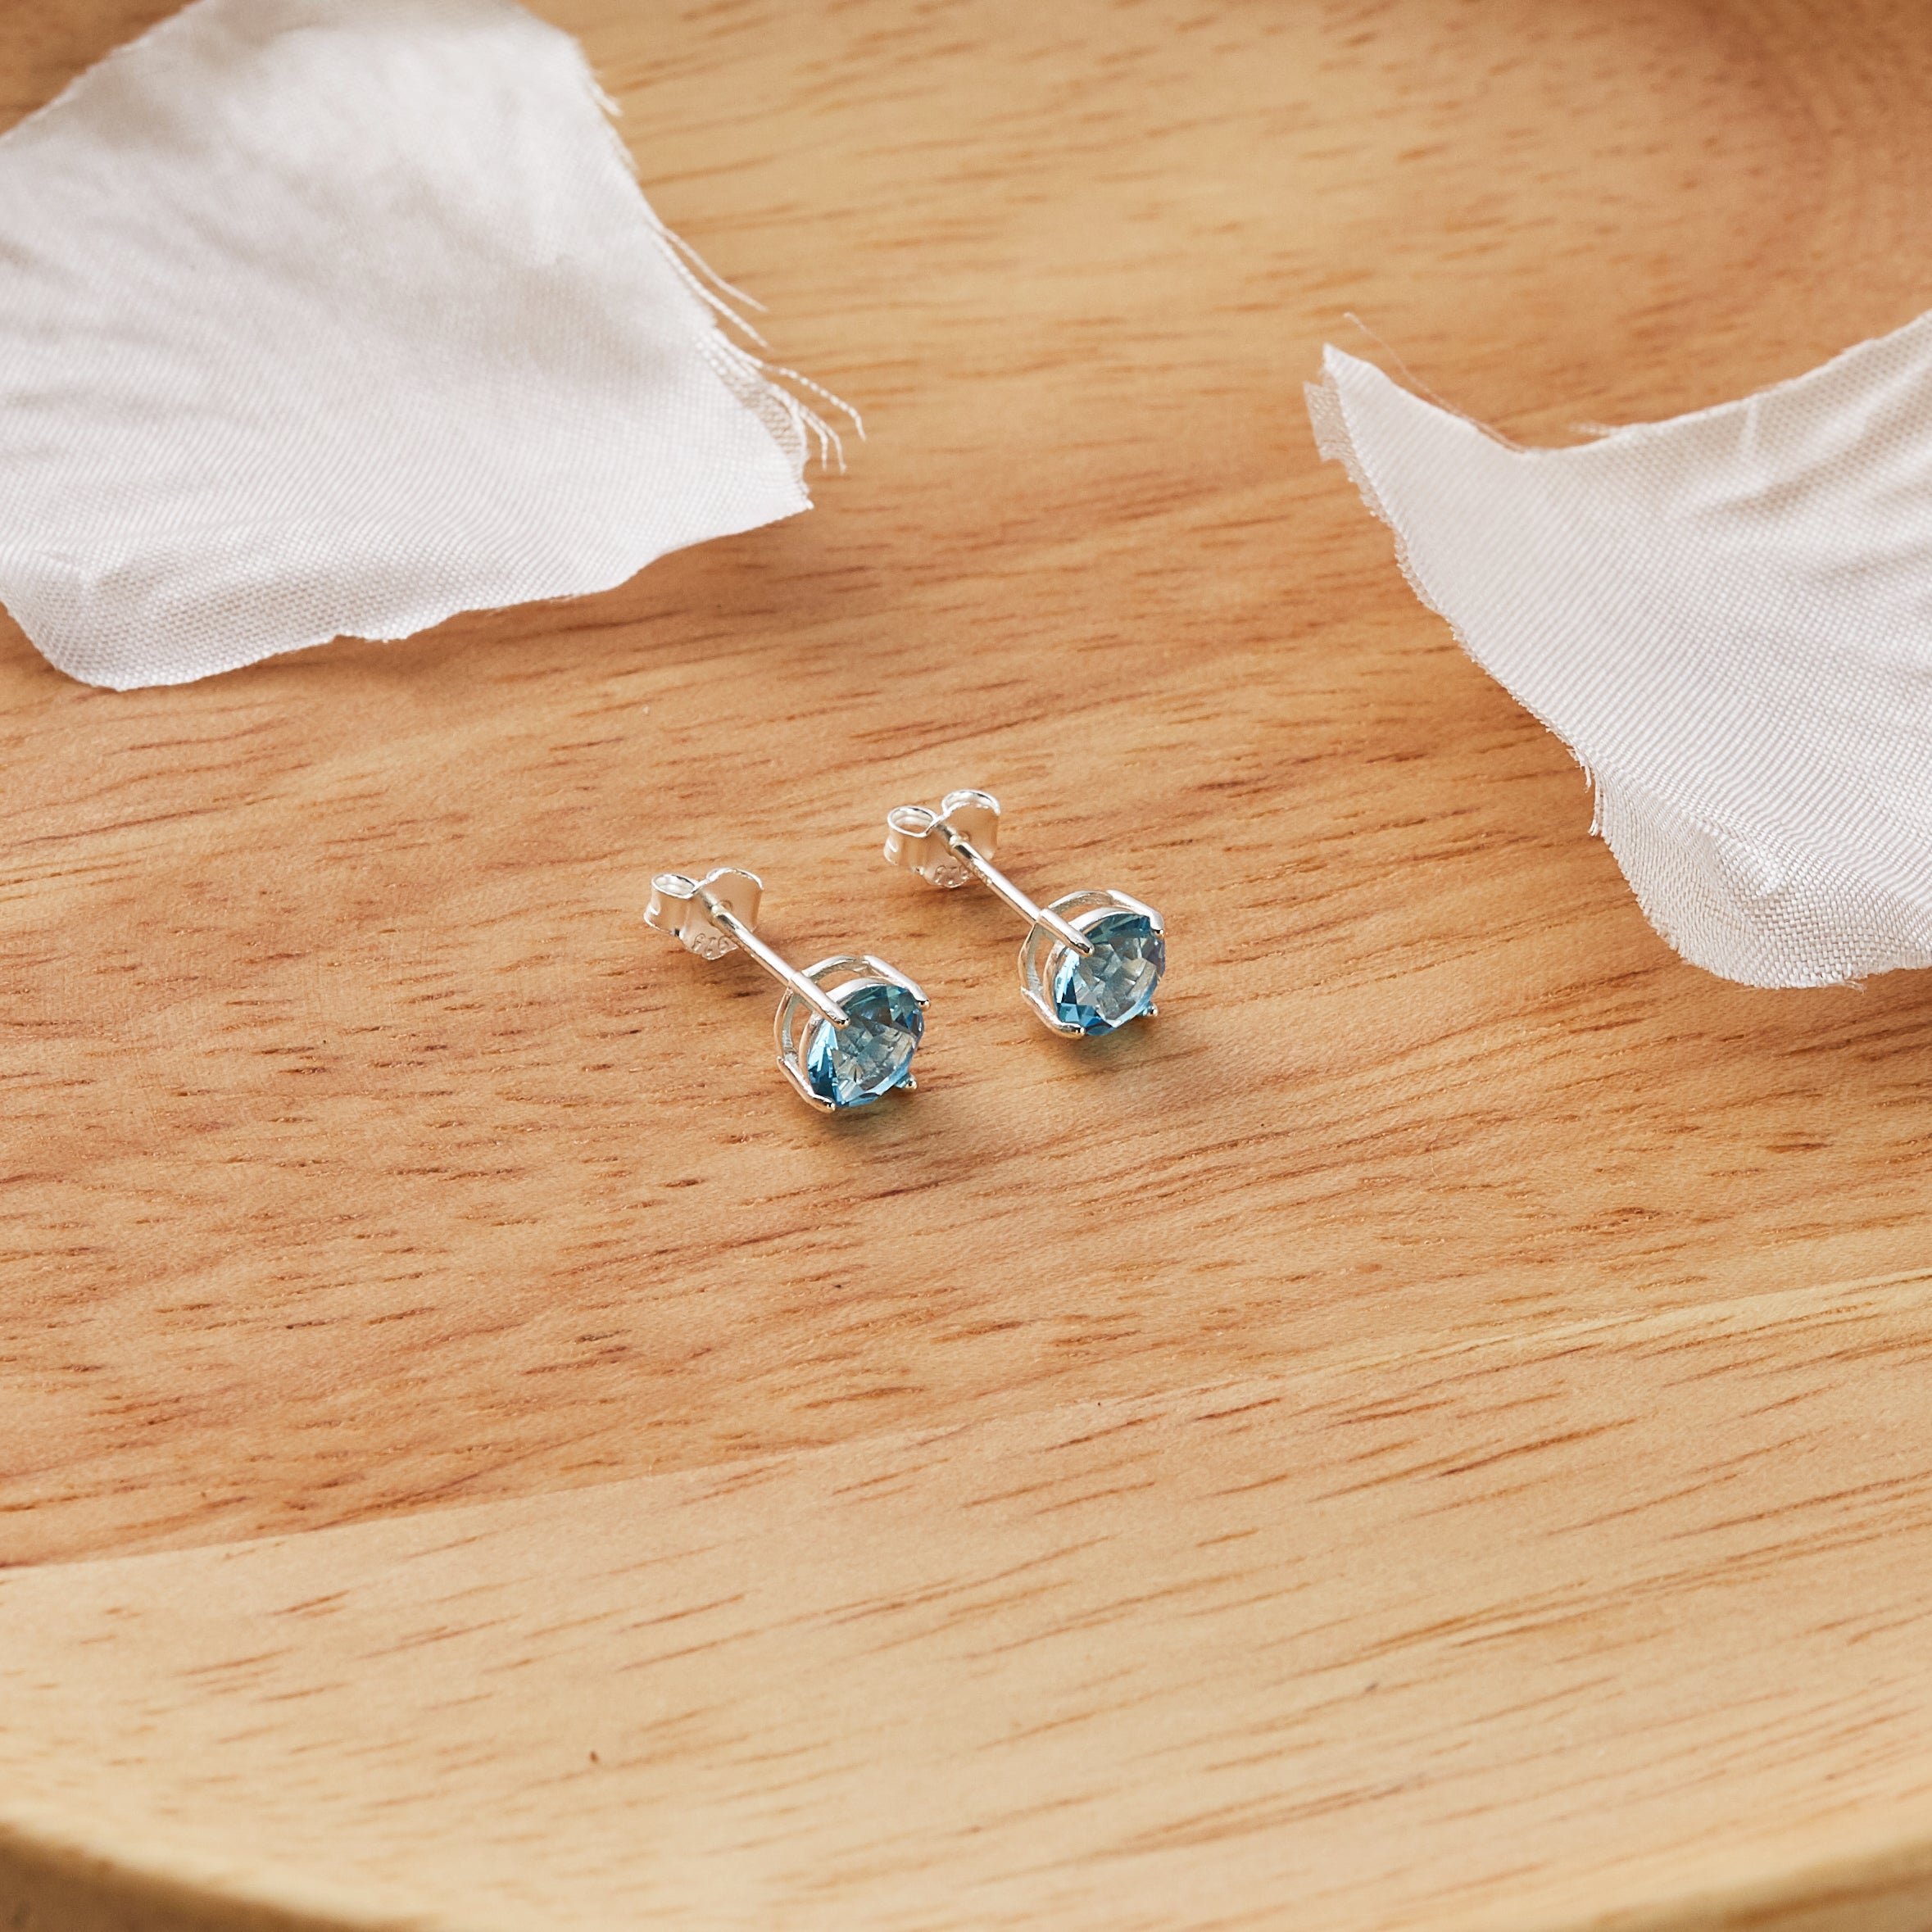 Sterling Silver March (Aquamarine) Birthstone Earrings Created with Zircondia® Crystals